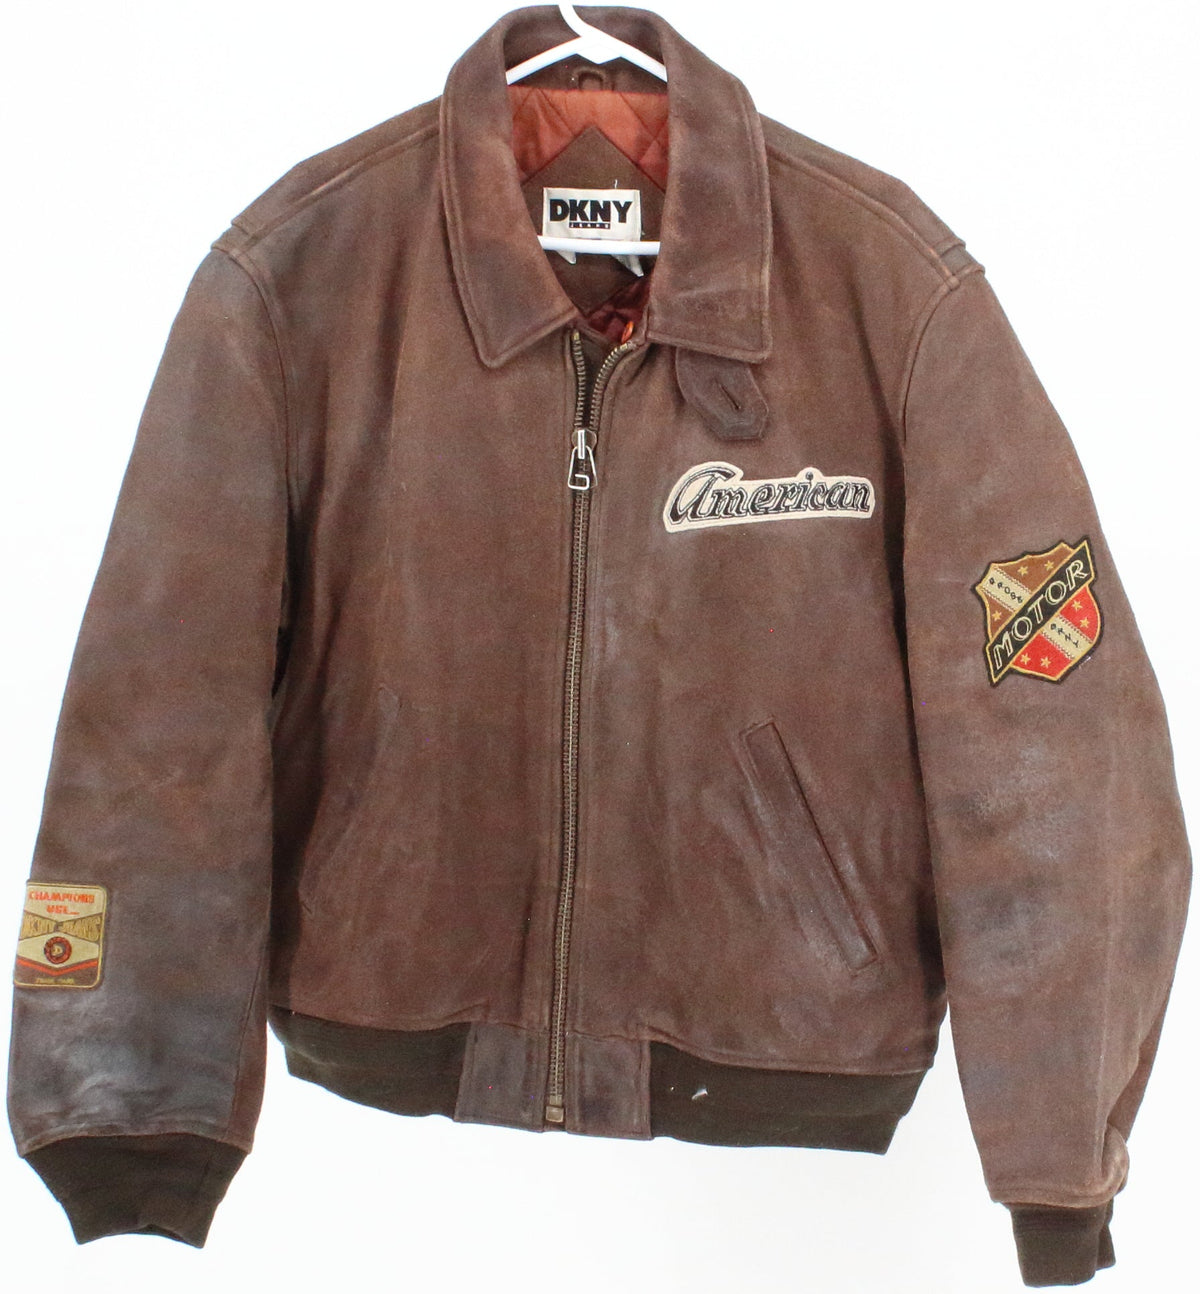 DKNY Jeans Brown Men's Motor Leather Jacket With Patches